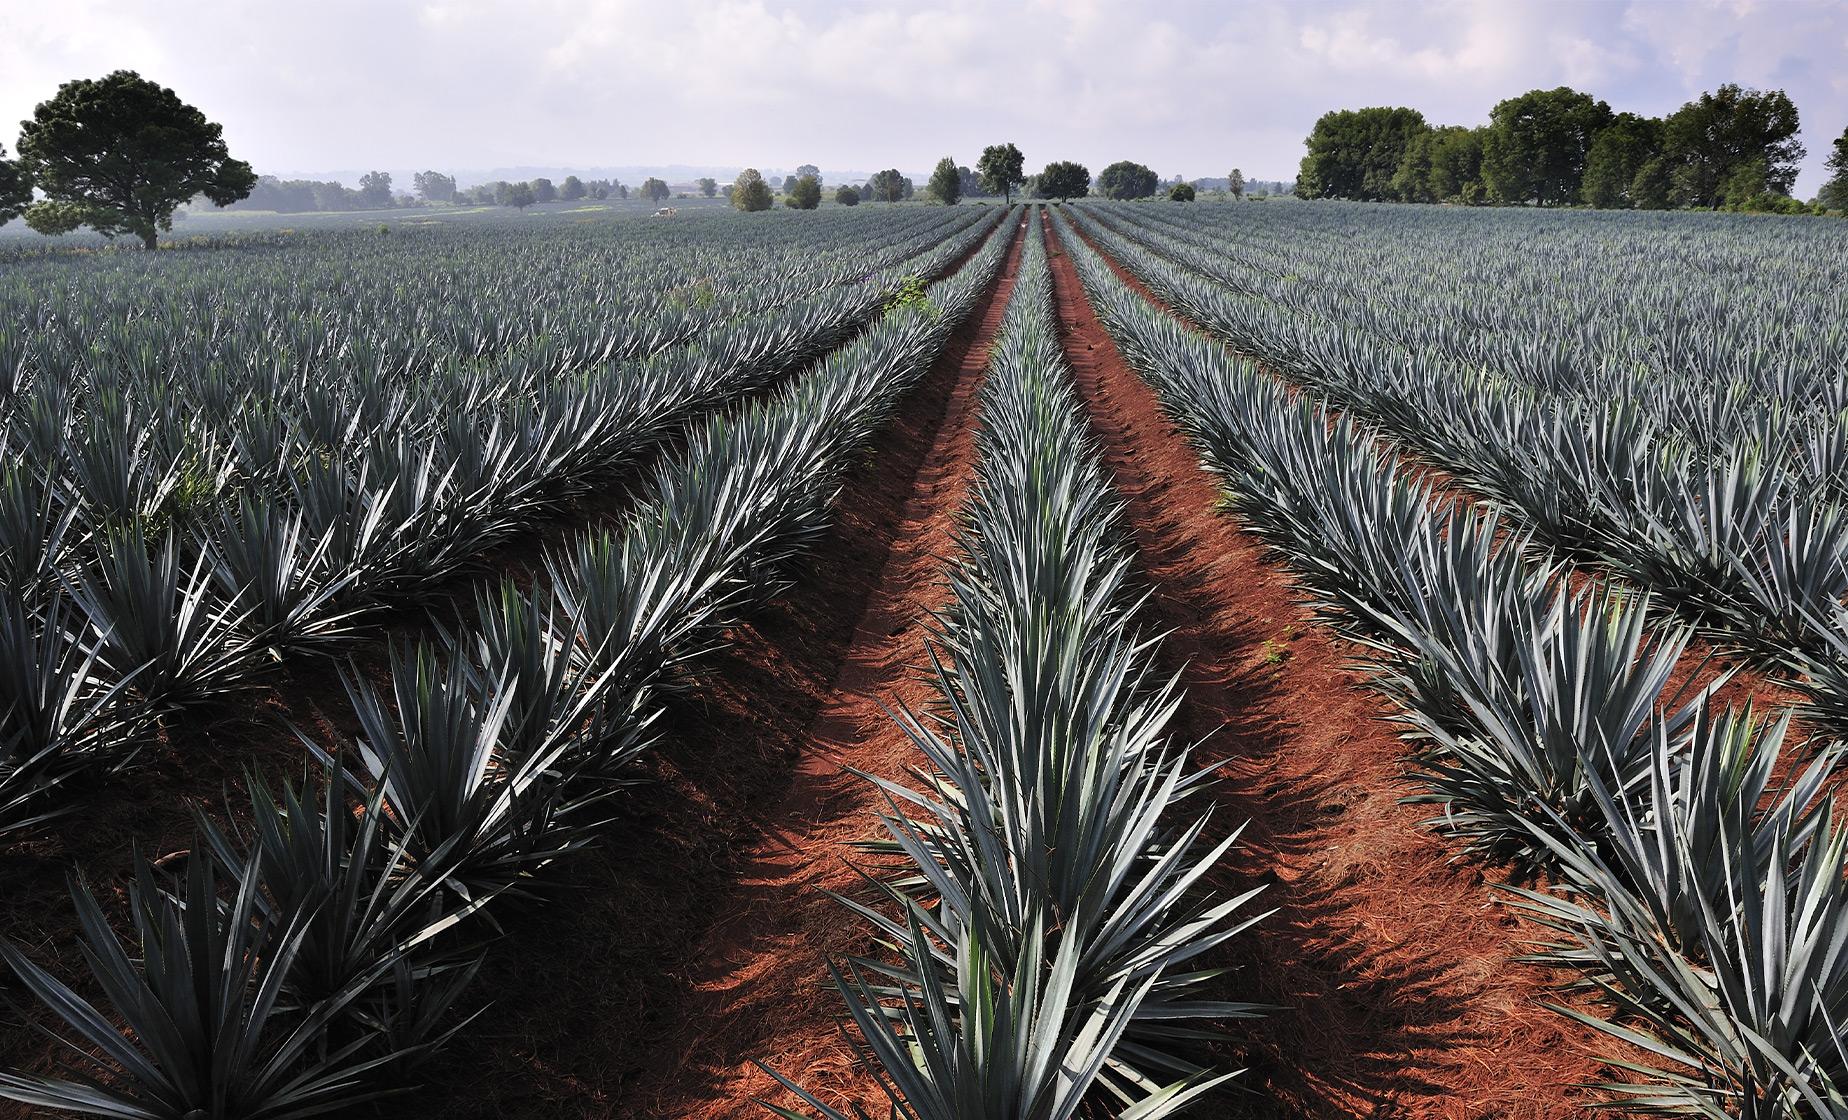 Tequila Factory and Villages